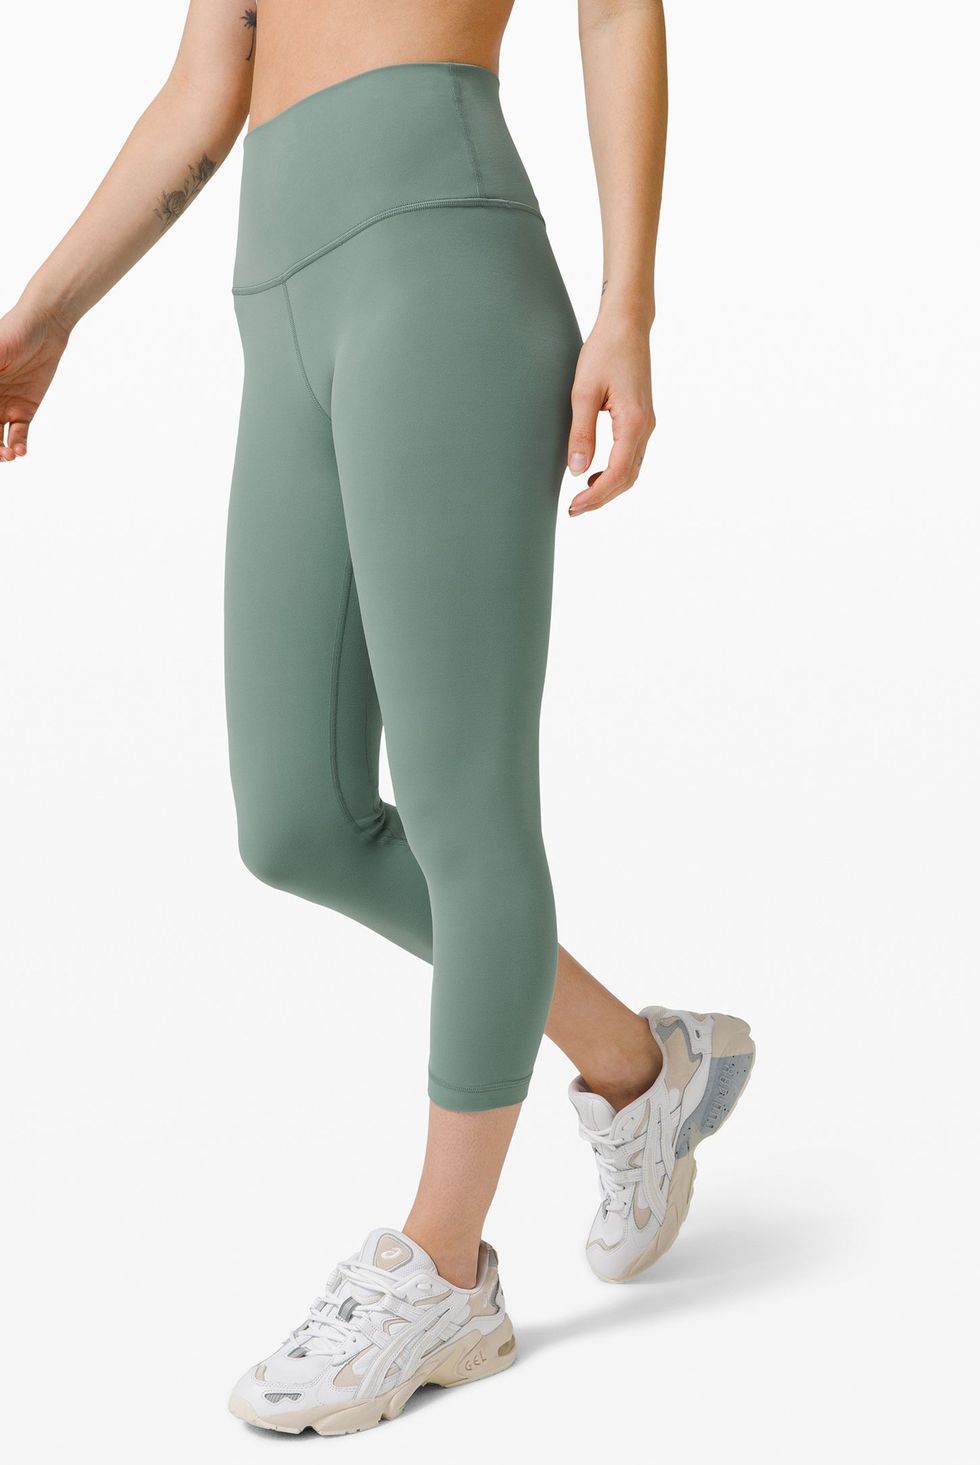 Lululemon Leggings Sale: Score Up To 80% Off Aligns And More Now